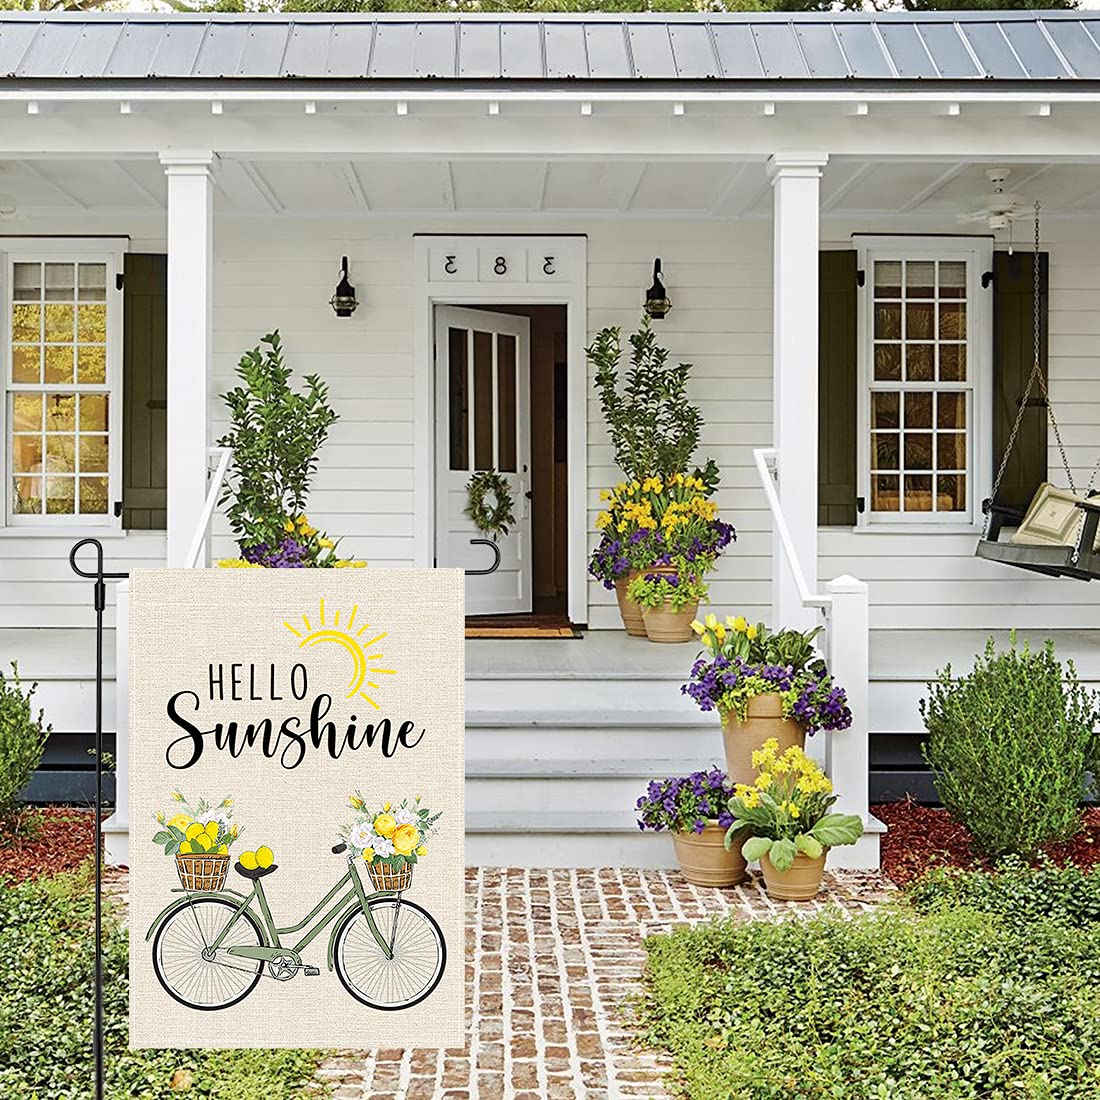 Spring Summer Garden Flag 12×18 Inch Double Sided, Lemon Welcome Bicycle with Sunshine